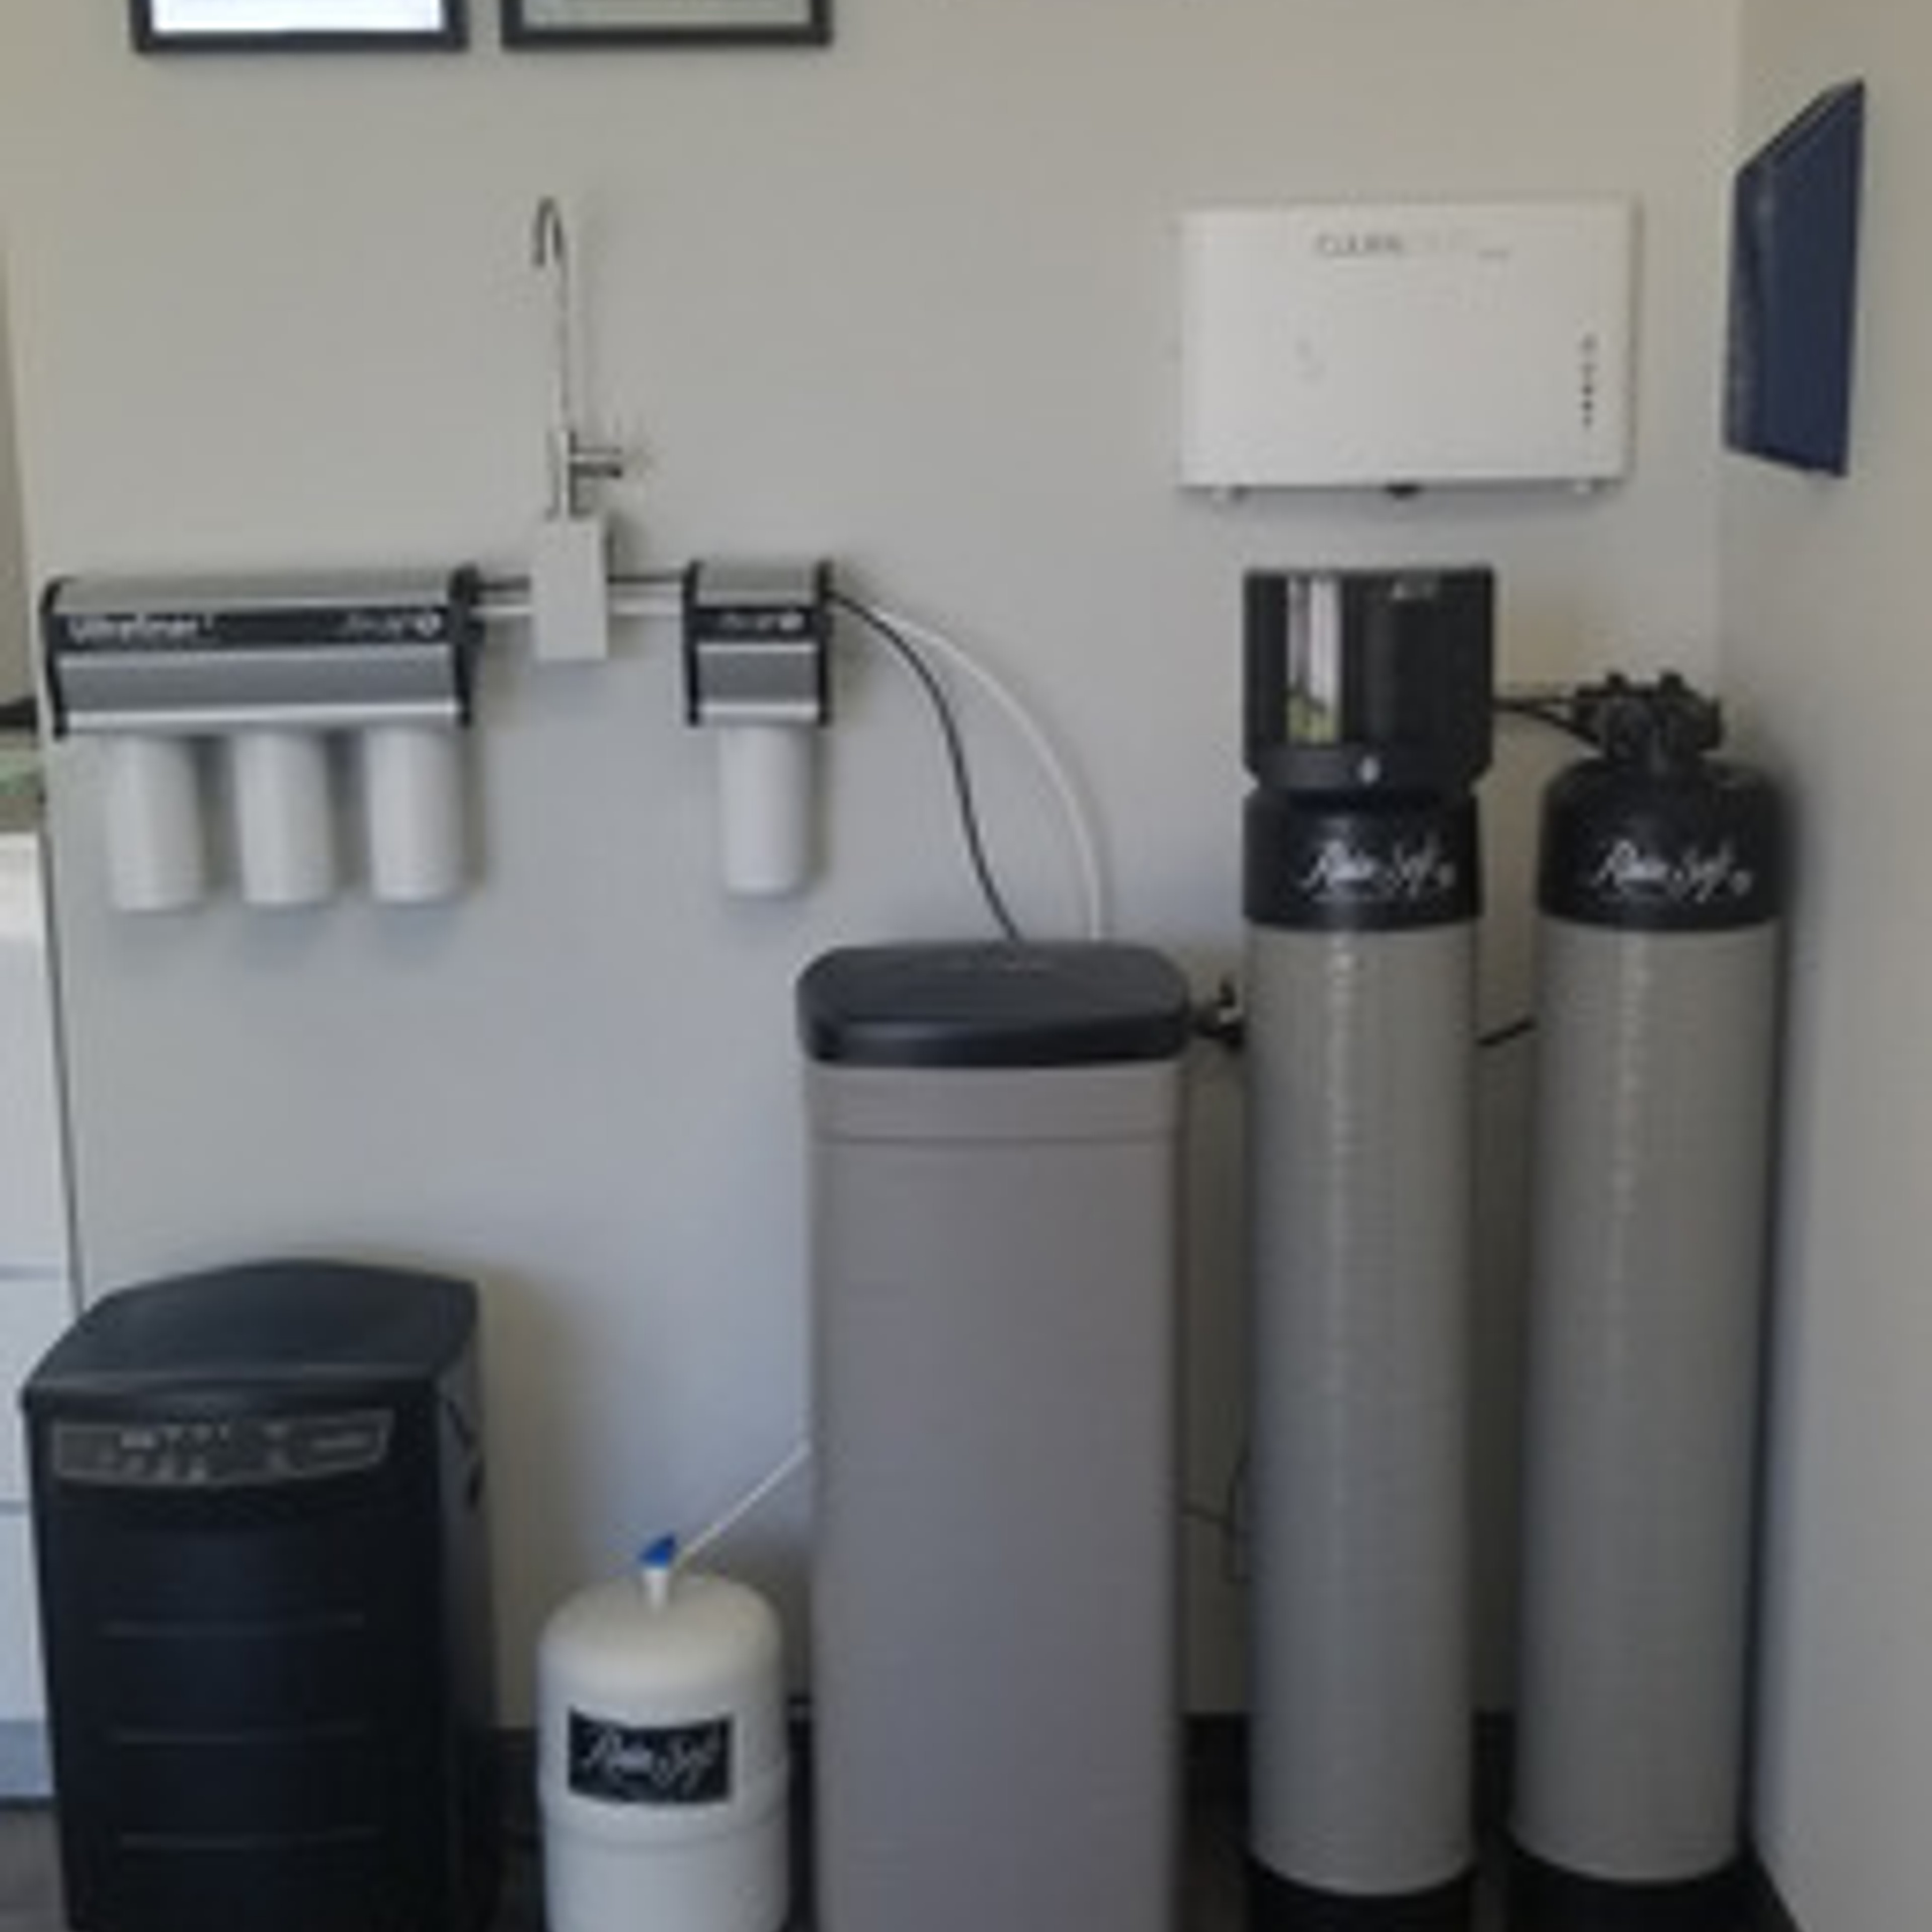 Selling Water Treatment Systems to Residential Home Owners. Highest Quality, Best Warranties, Most Affordable Plans